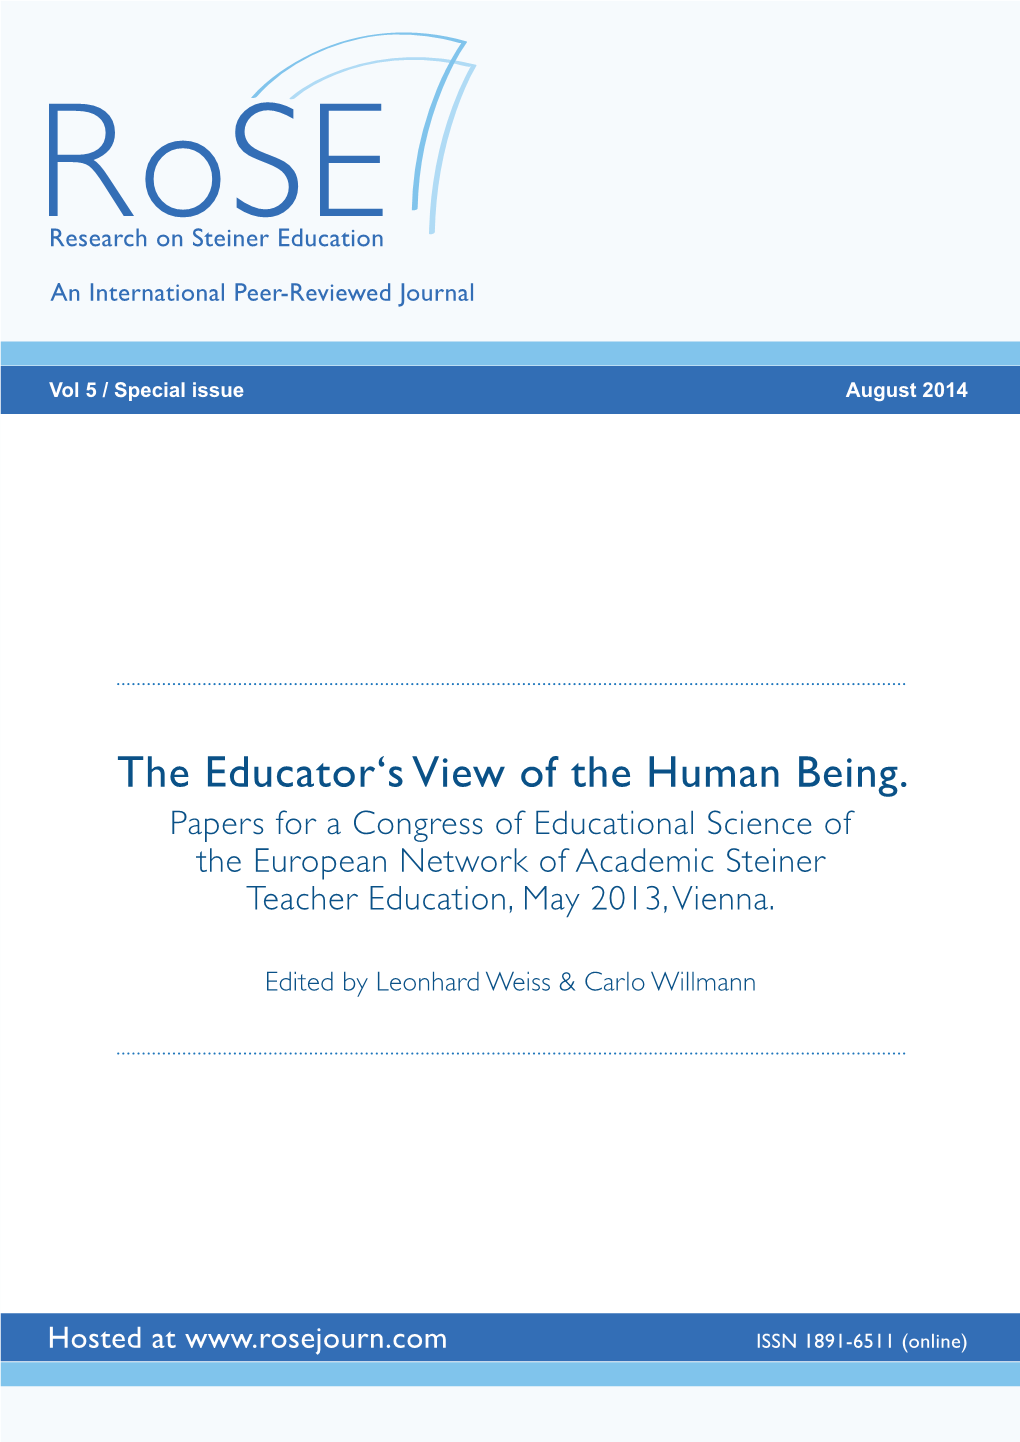 The Educator's View of the Human Being